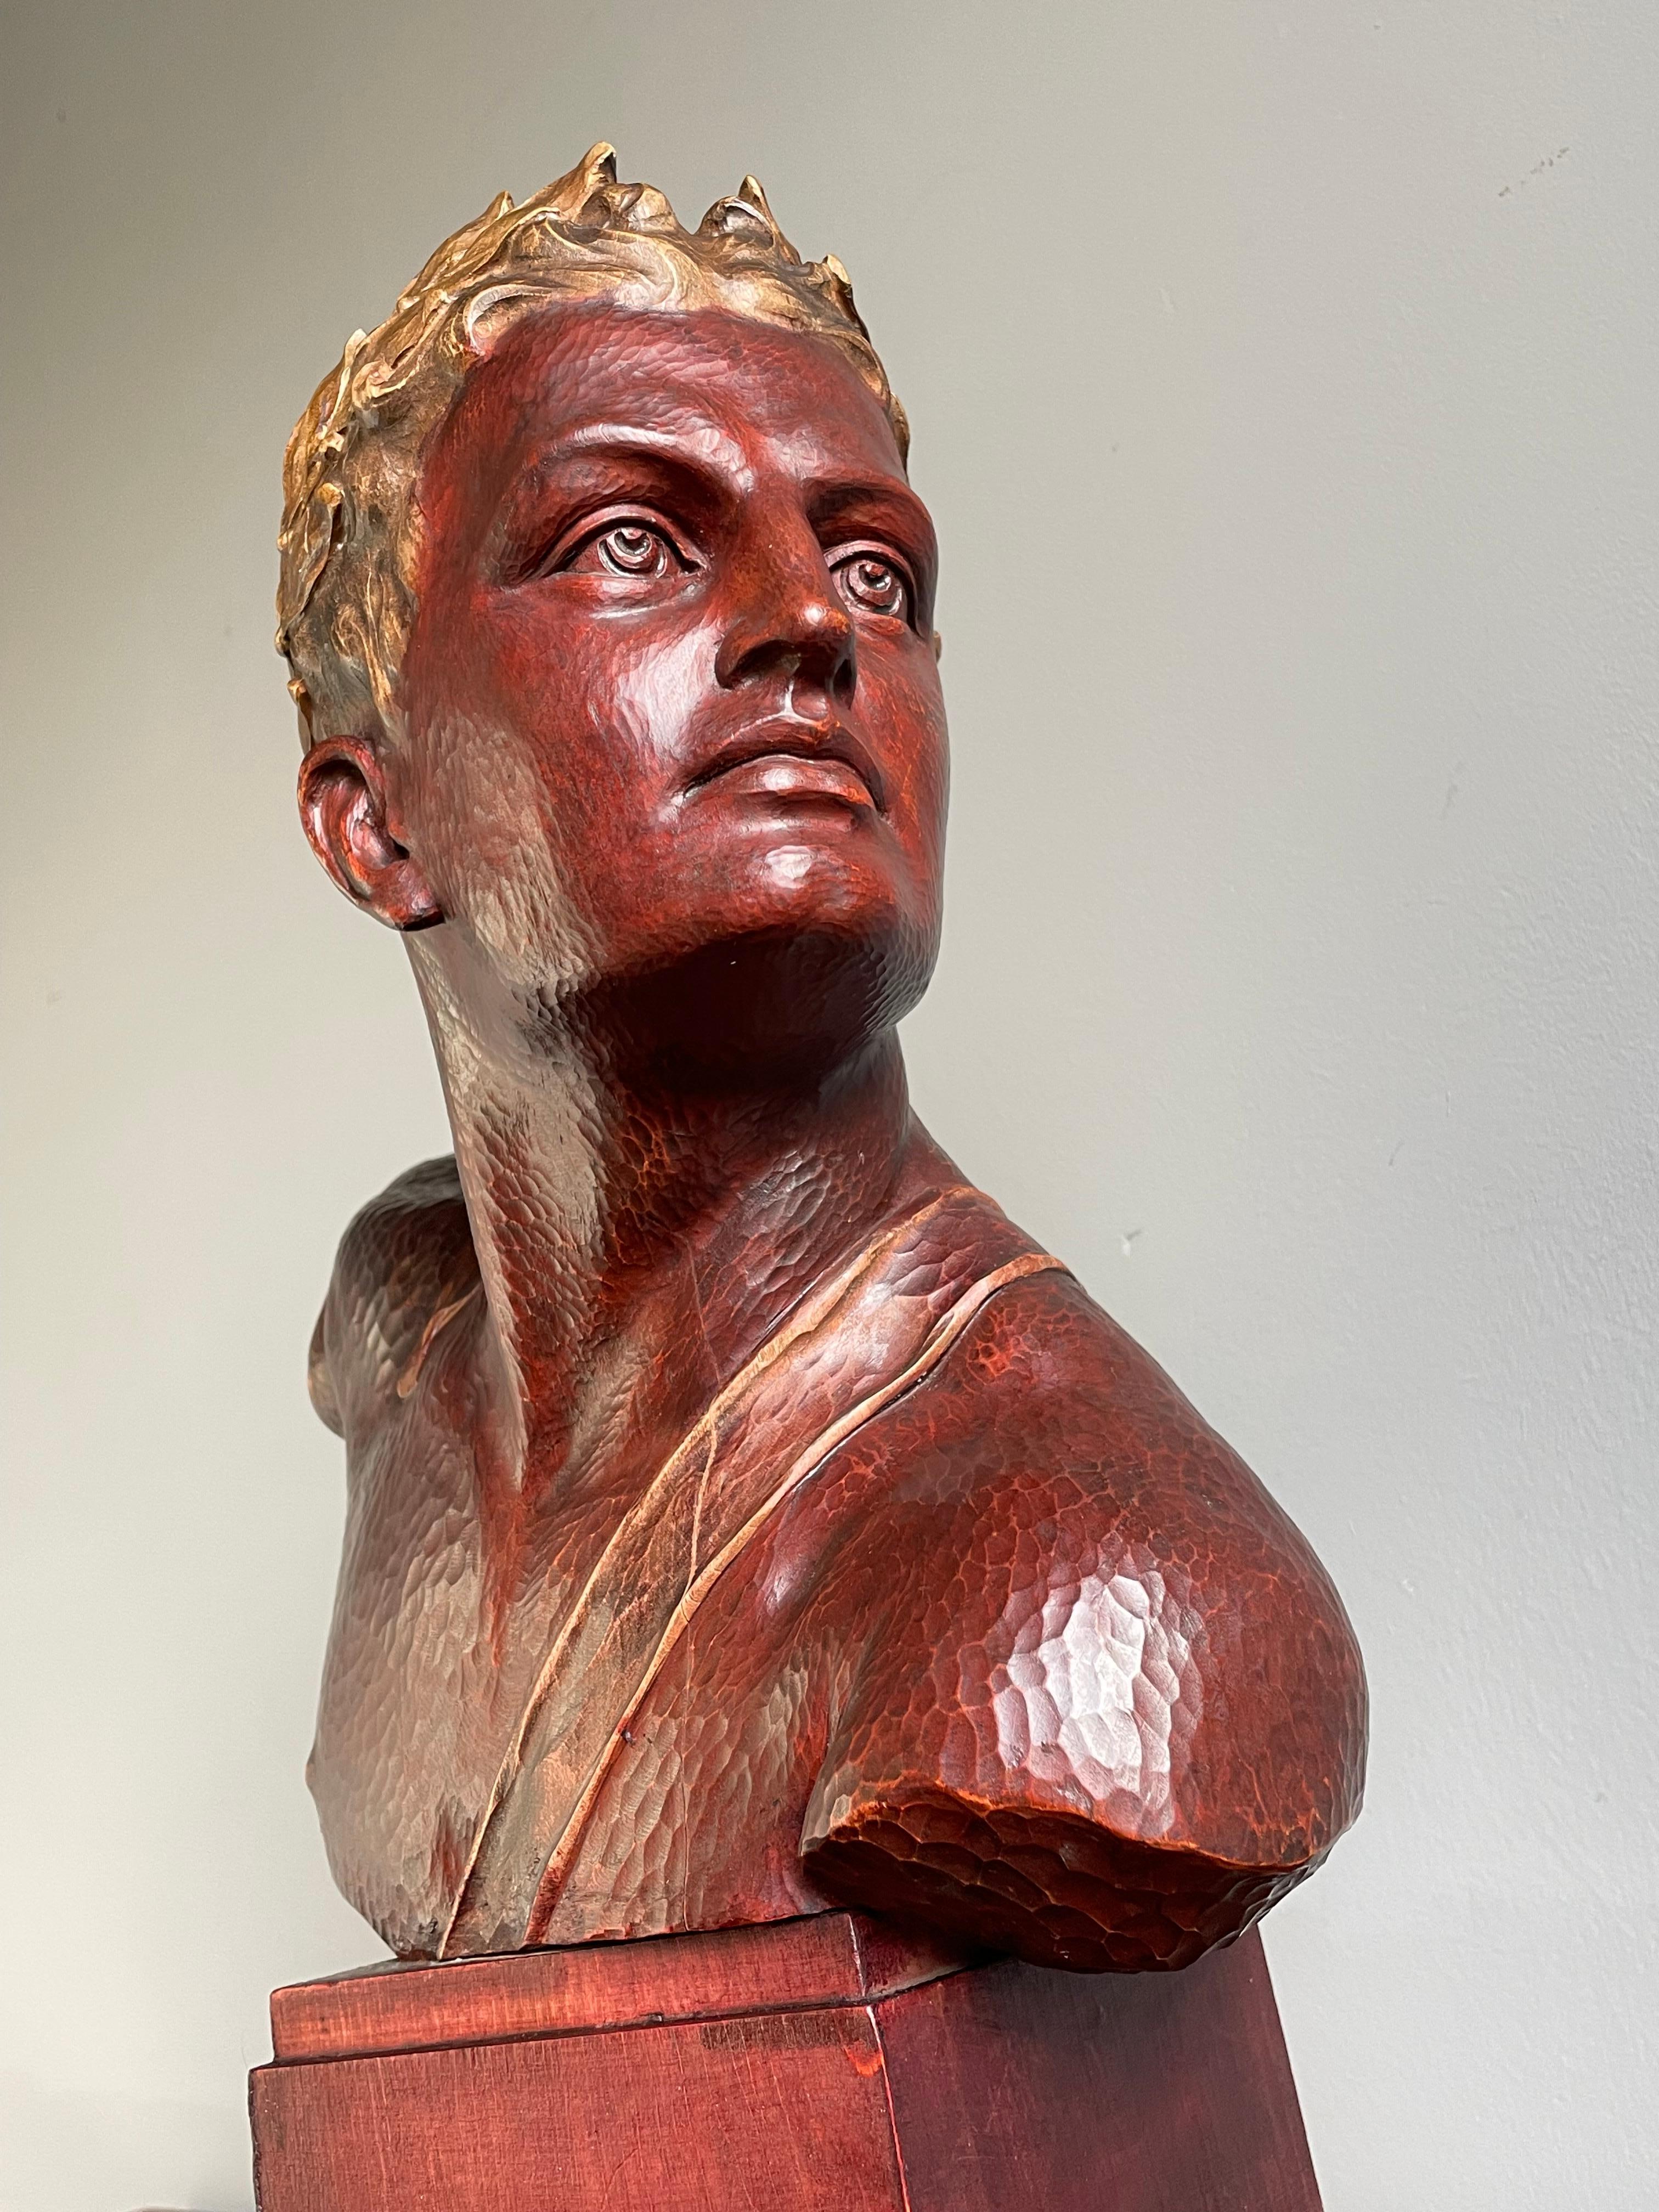 Solid wooden bust of an Olympic champion by (professor) Otto Poertzel (1876 - 1963).

This stunning bust of a young male athlete is of museum quality and condition. Both the geometrical design of the wooden base and the fresh and energetic look and